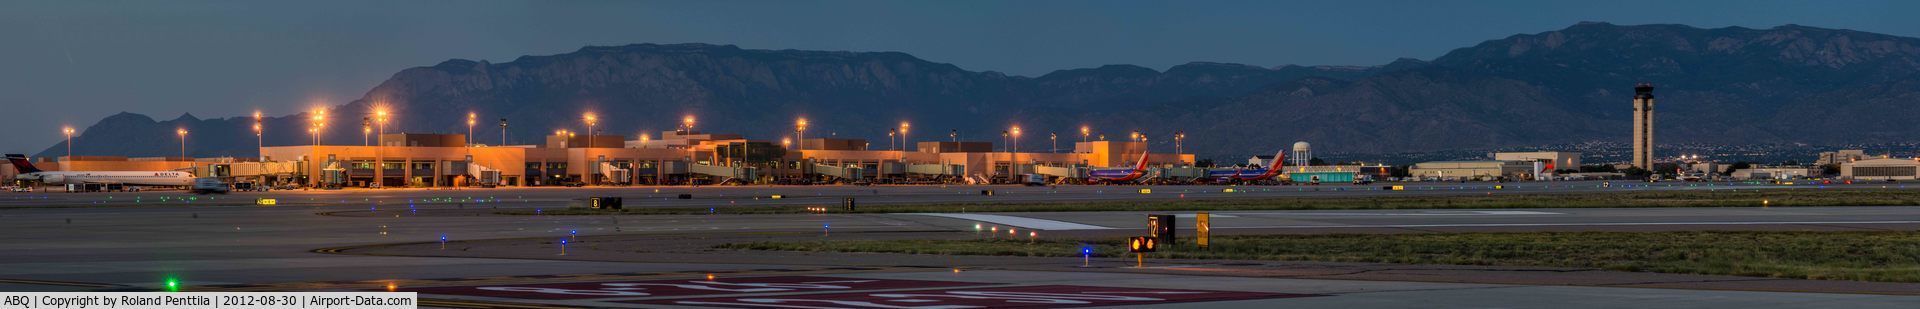 Albuquerque International Sunport Airport (ABQ) - Airport Terminal and tower as seen from field.